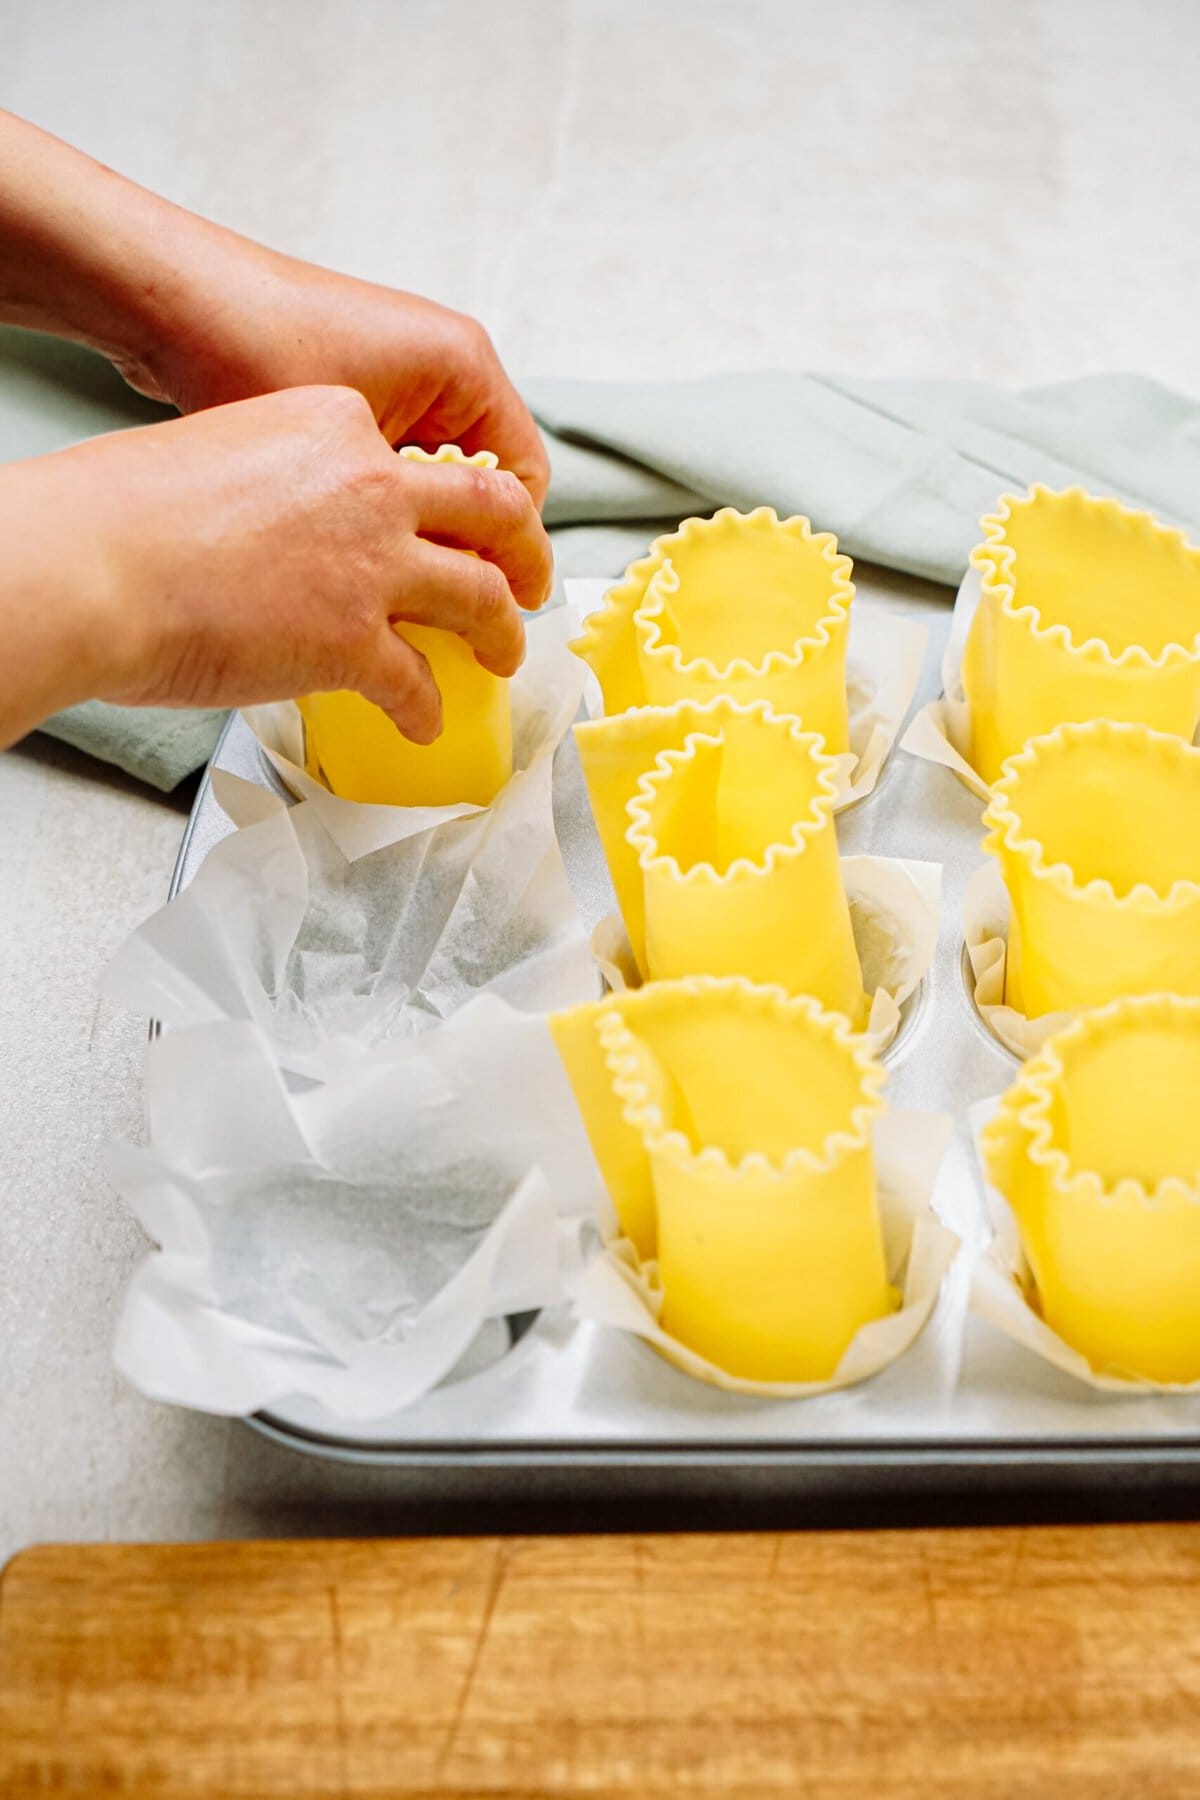 Hands are arranging lasagna noodles rolled into cylindrical shapes in parchment-lined muffin tin compartments on a table.